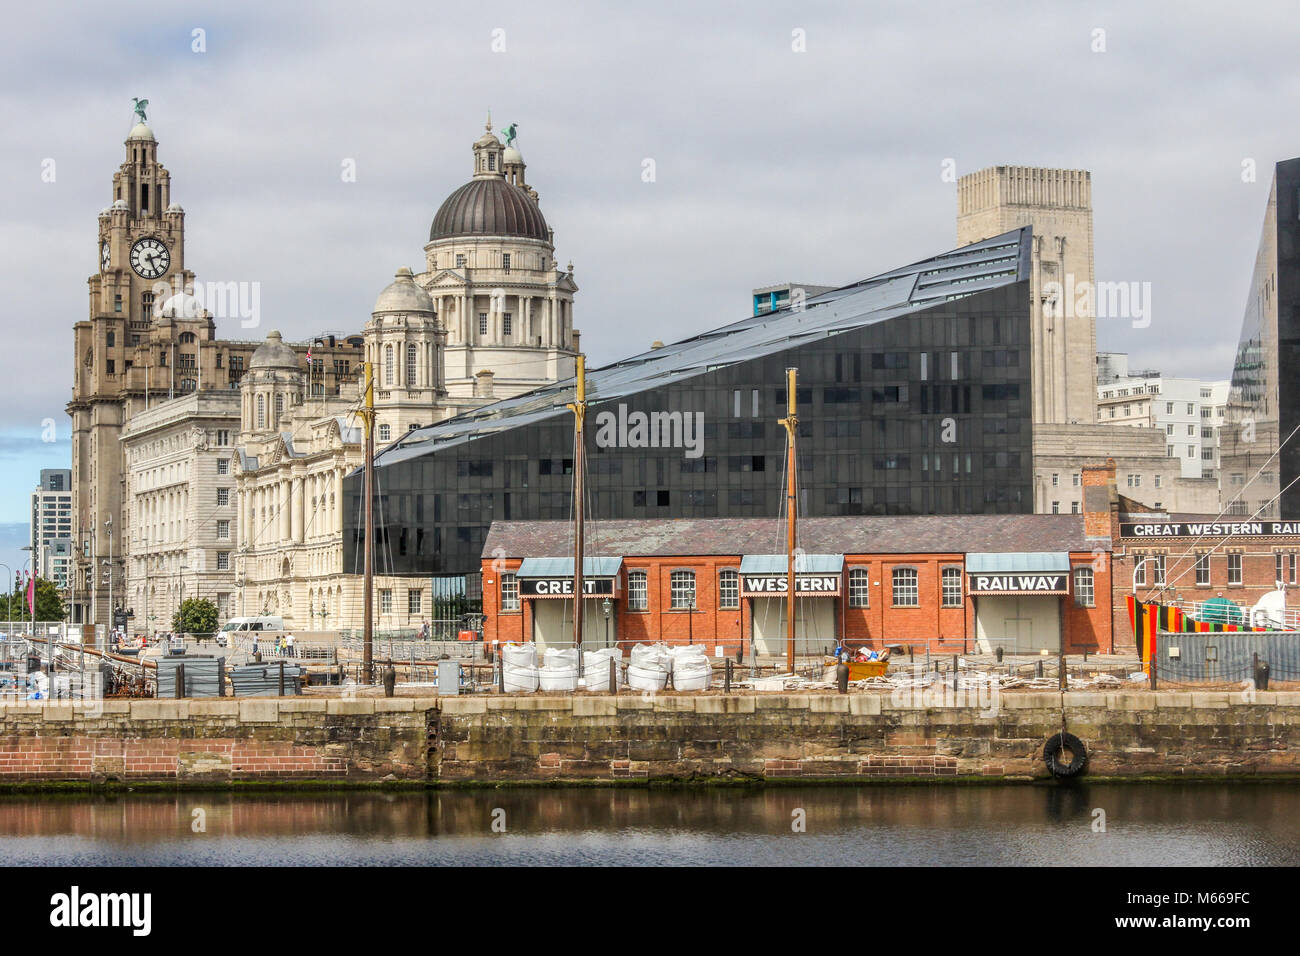 View from Canning dock of Great Western Railway building, along Georges Pierhead to Port of Liverpool building, the Cunard Building and the Royal Live Stock Photo